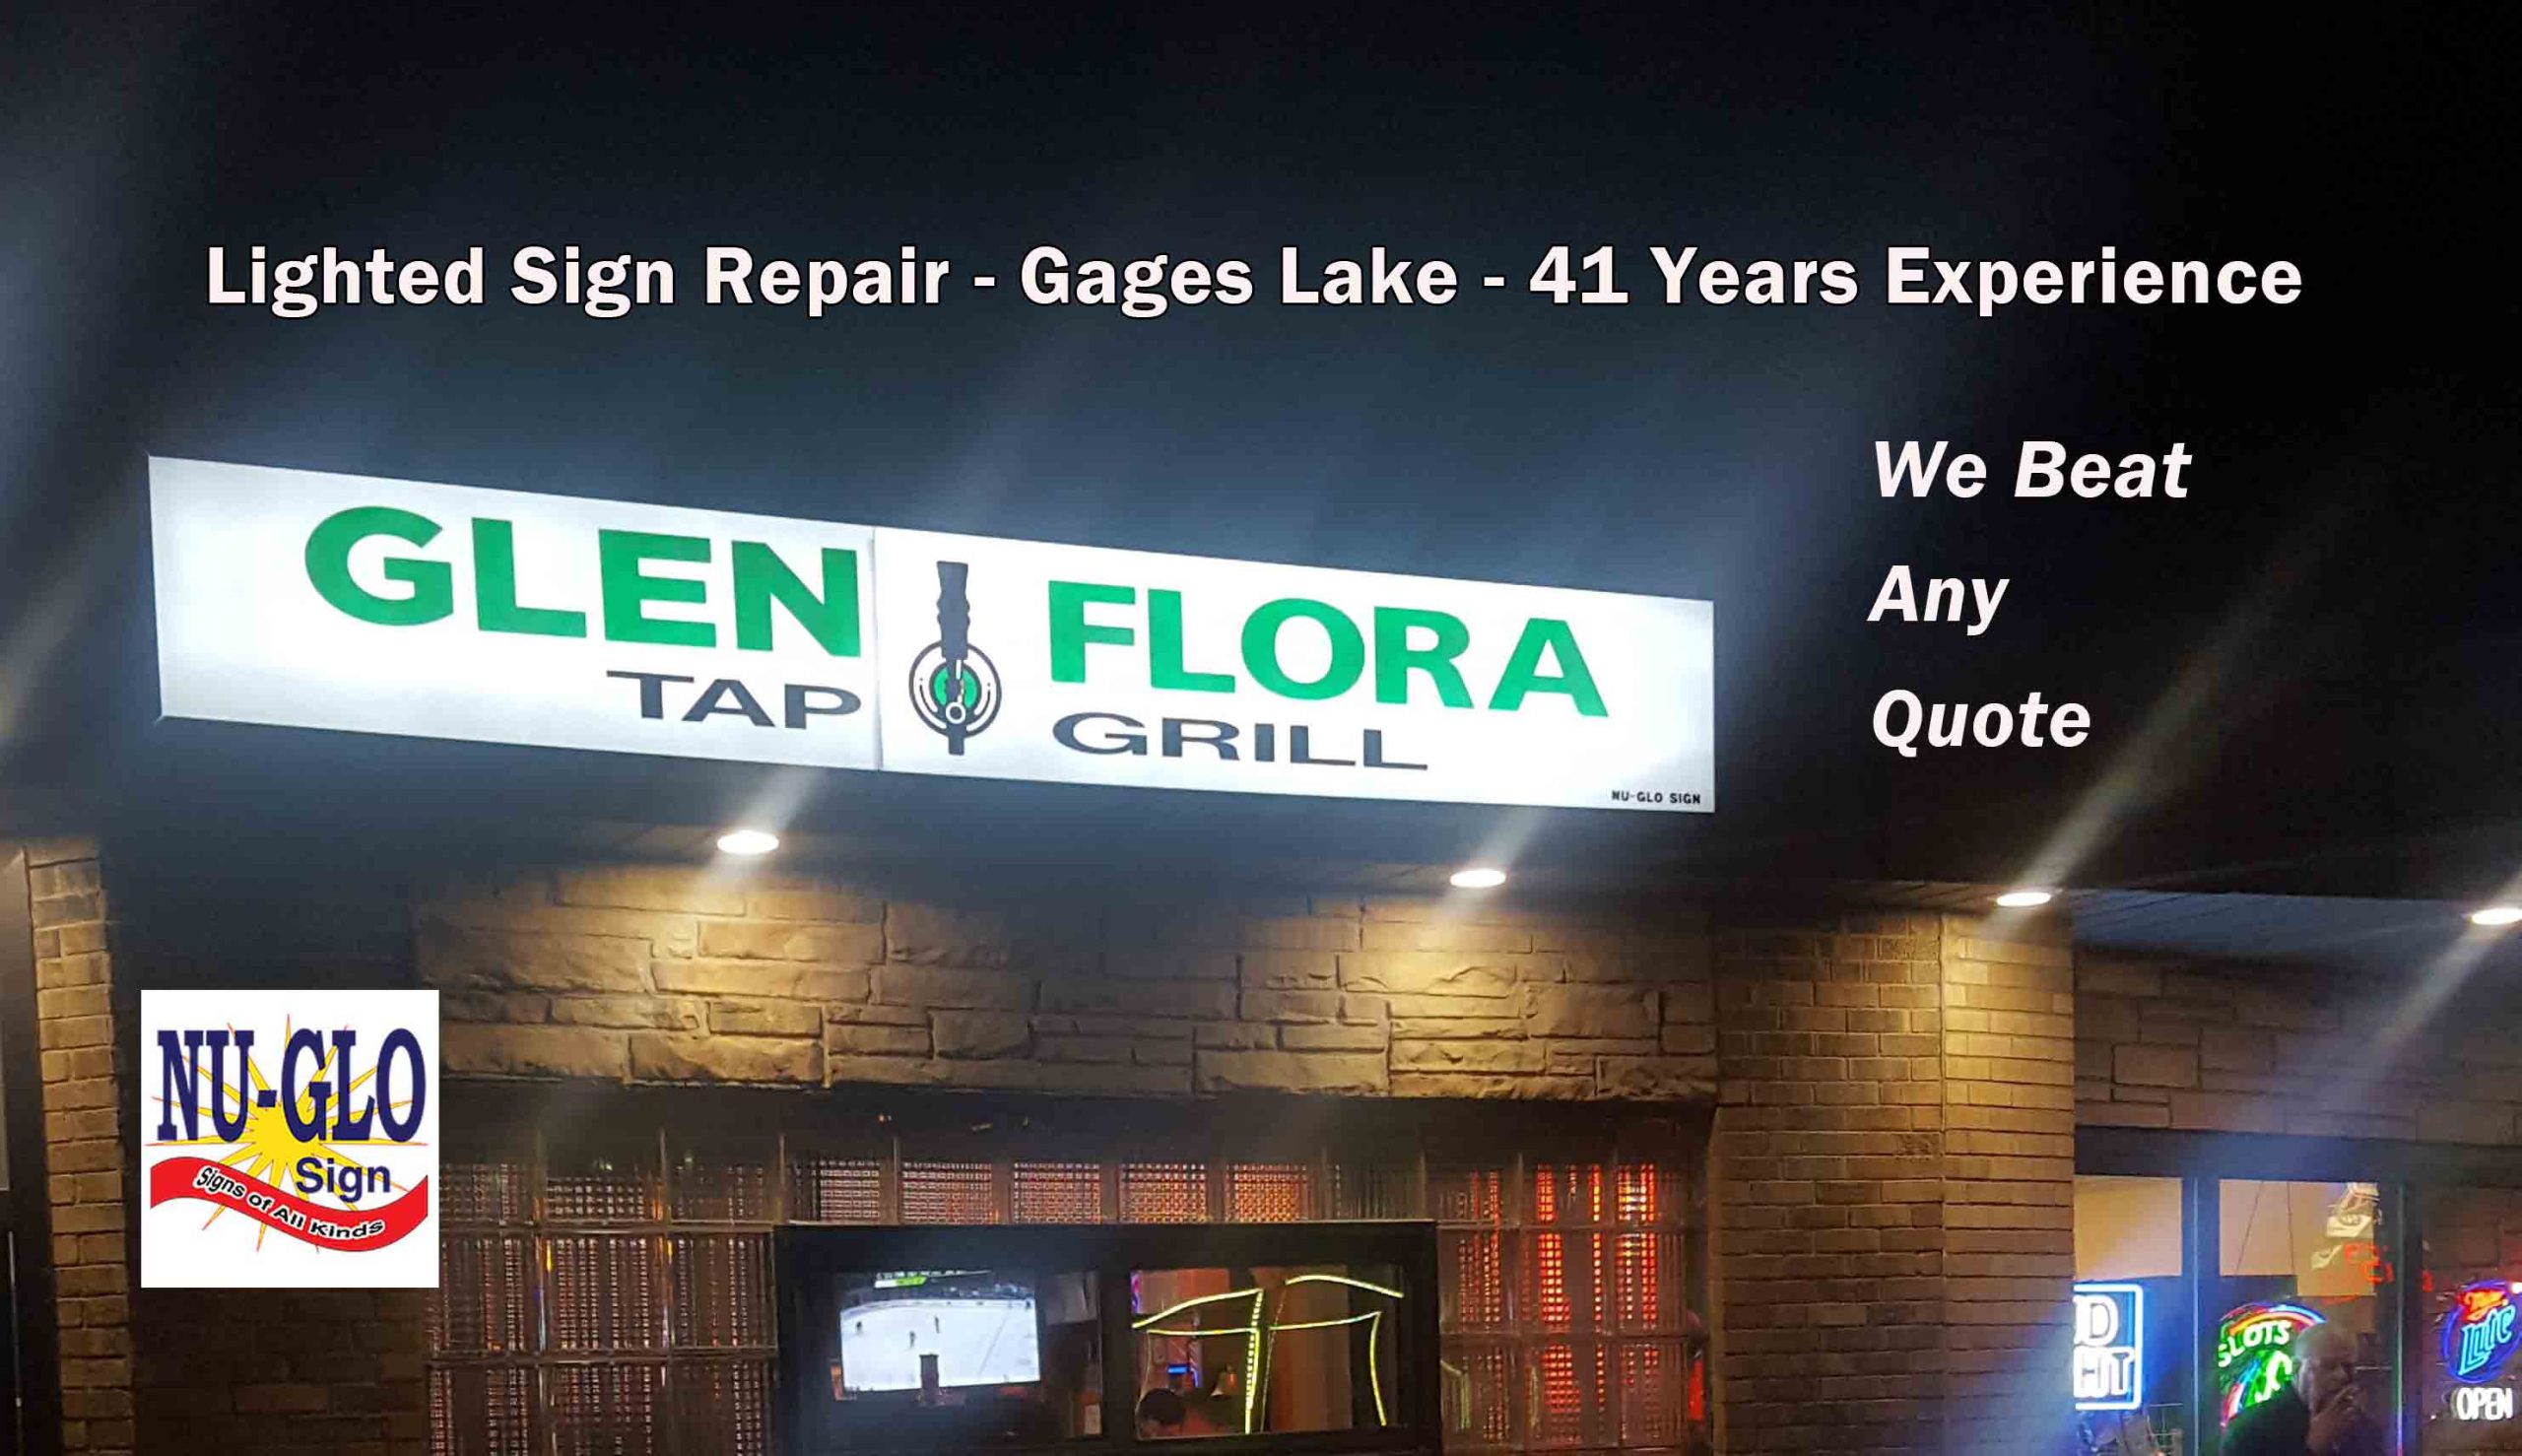 Lighted Sign Repair - Gages Lake